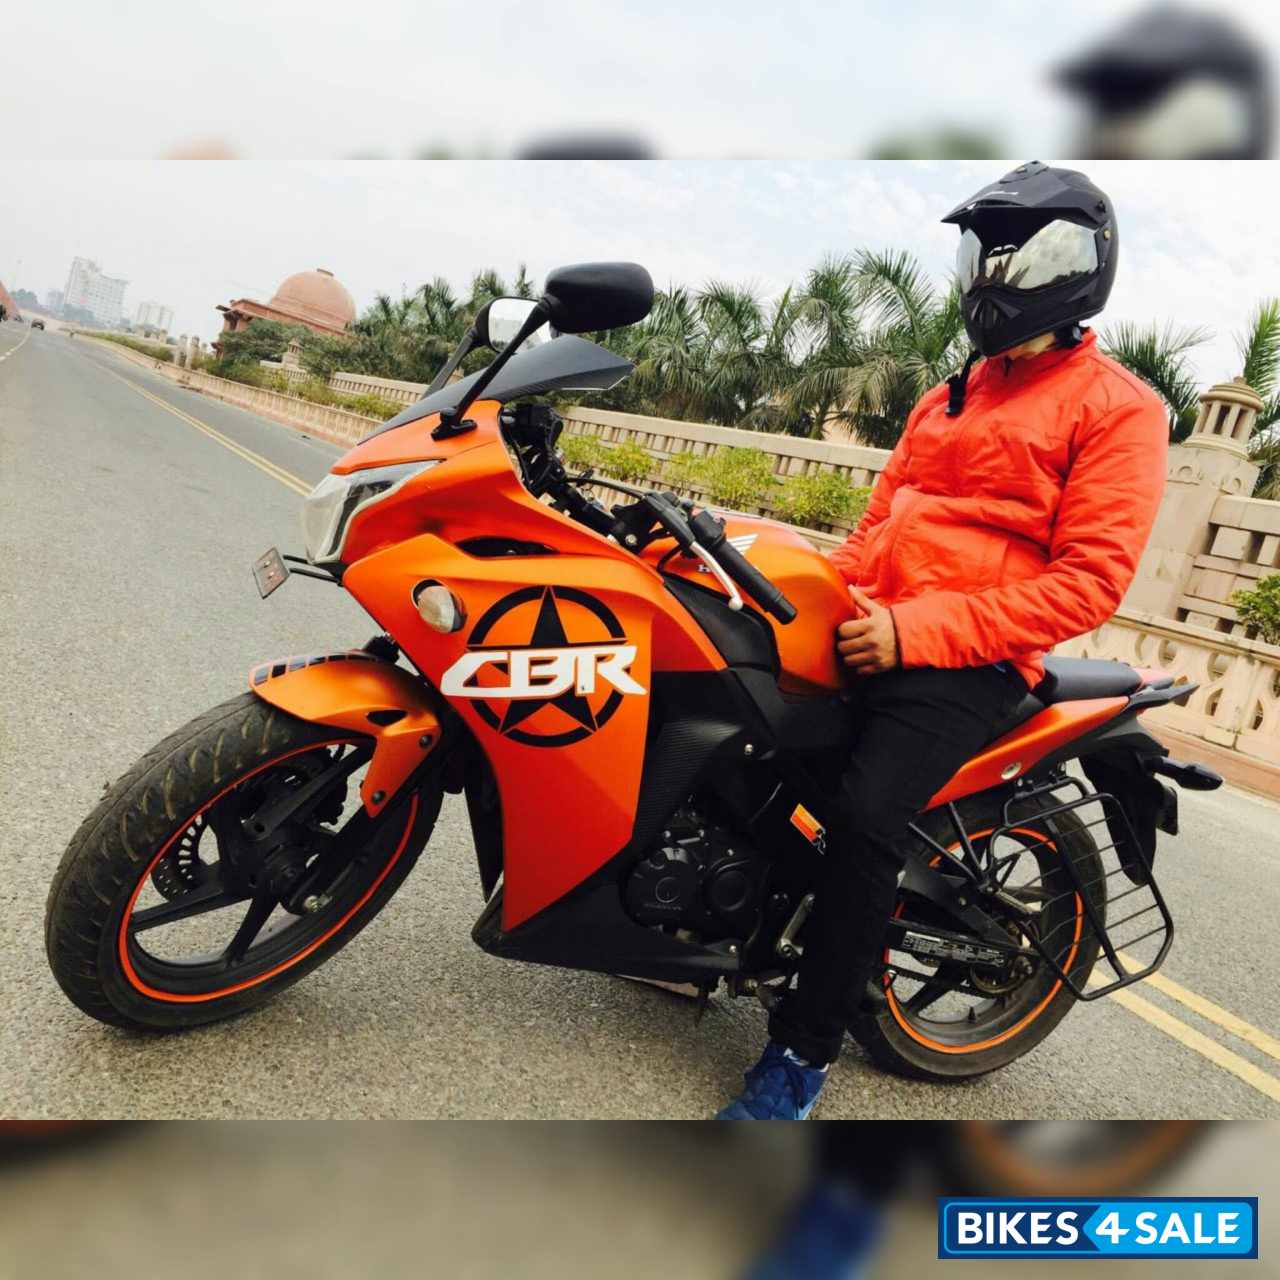 Used 2014 model Honda CBR 150R for sale in Lucknow. ID ...